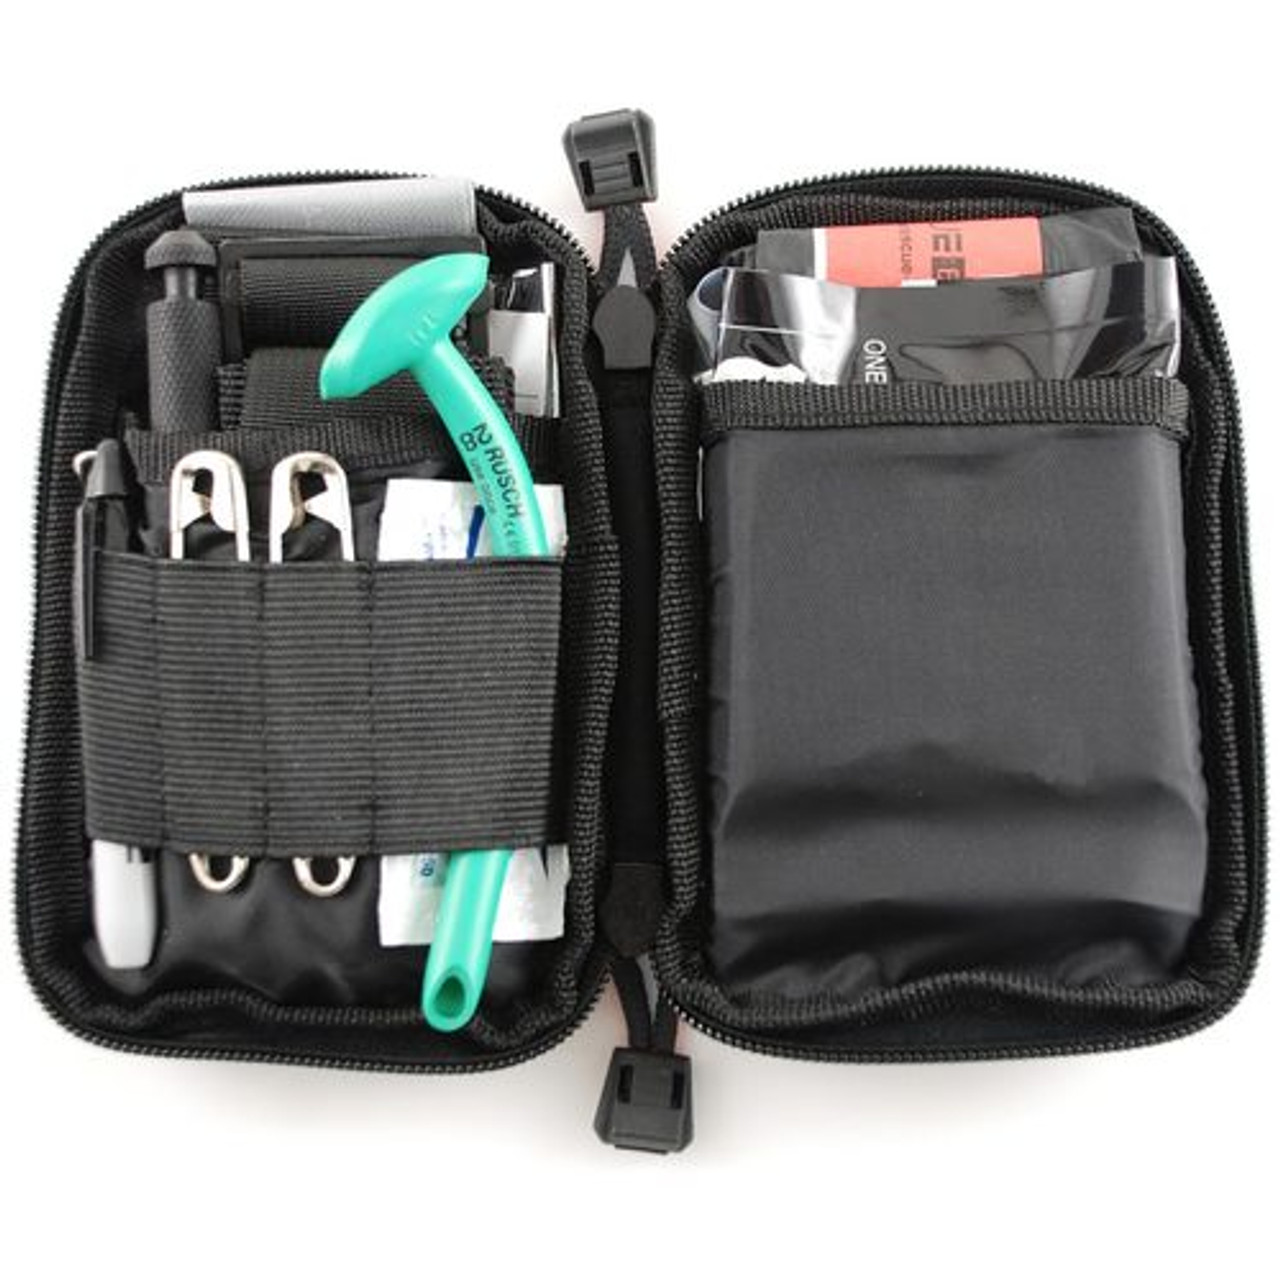  Small Compact IFAK Med Trauma Kit for Everyday Carry